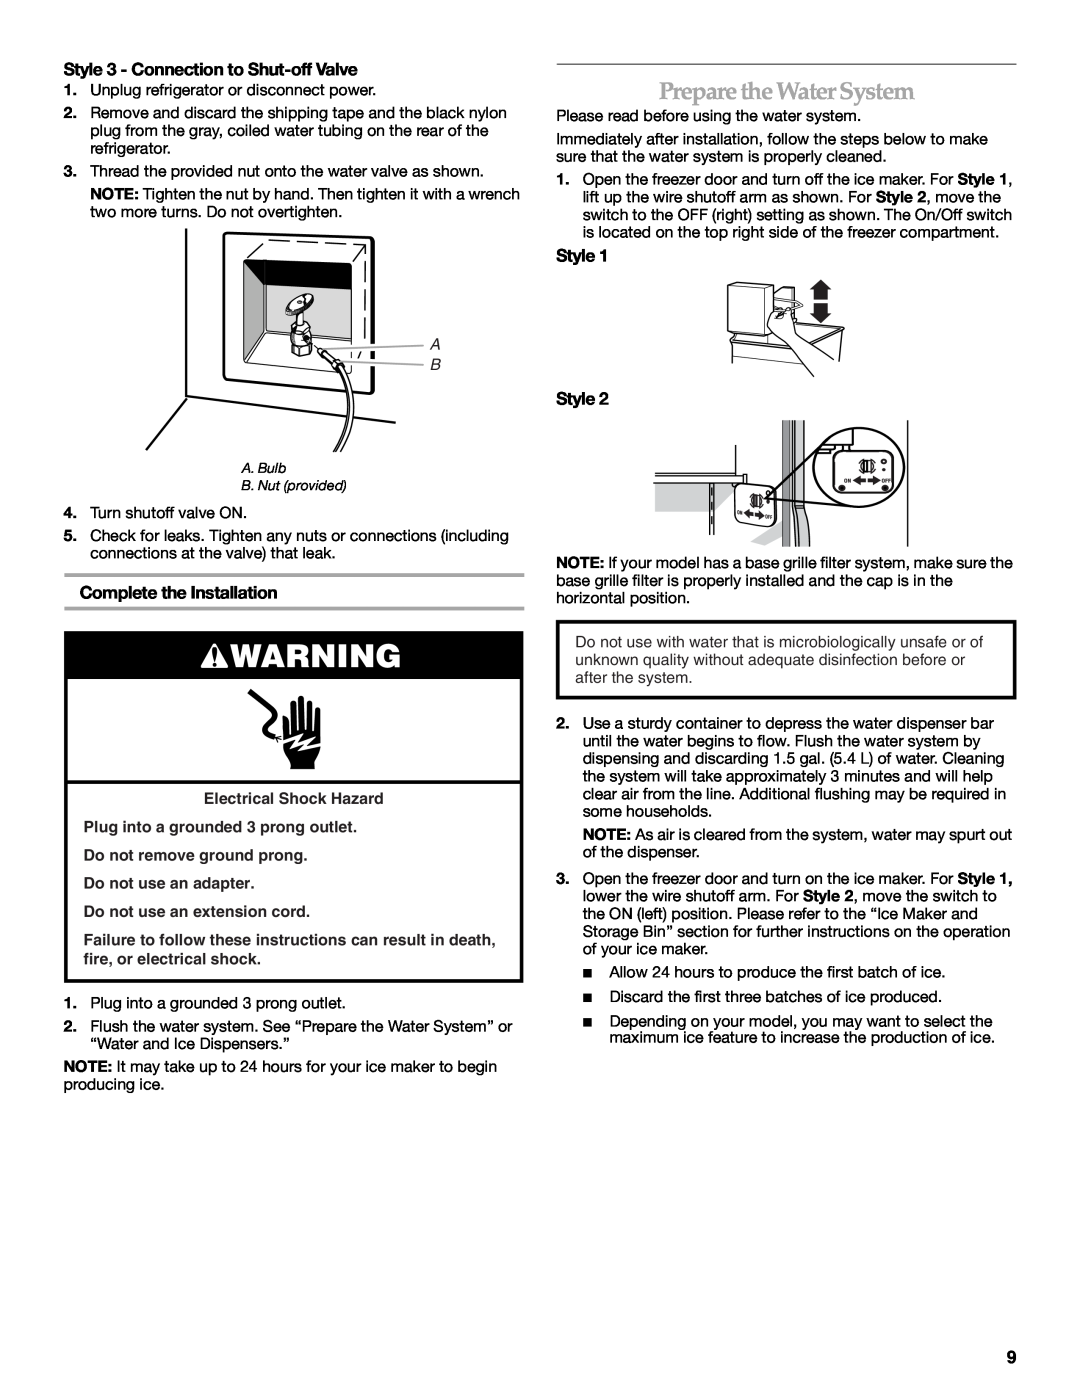 KitchenAid 2318581 manual Prepare the Water System, Style 3 - Connection to Shut-off Valve, Complete the Installation 